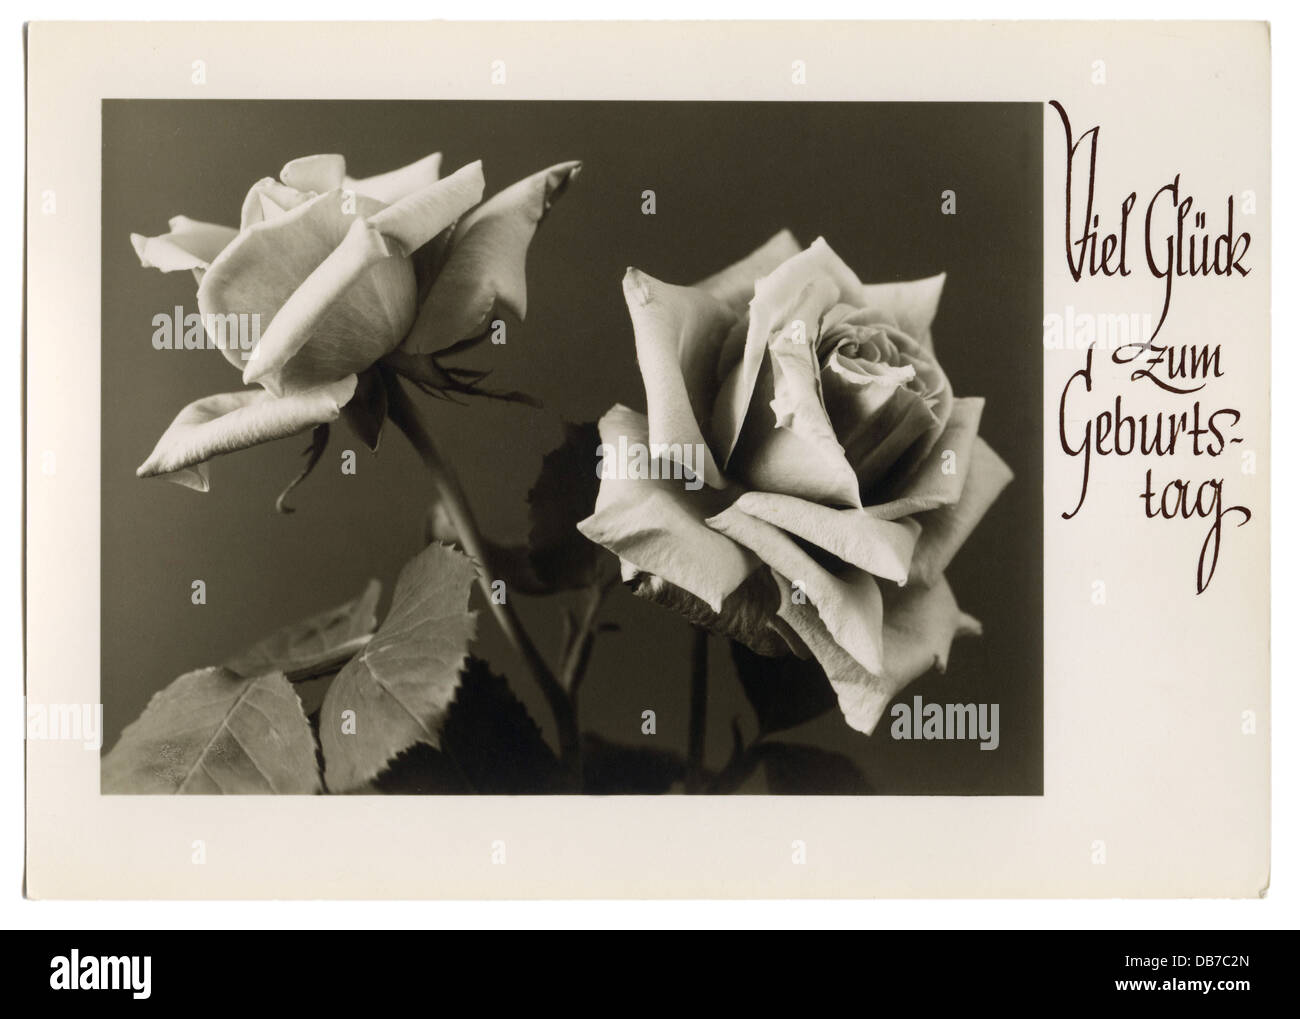 festivities, greetings card birthday, 'Viel Glück zum Geburtstag' (Good luck for your birthday), roses, picture postcard, Germany, 1930s, Additional-Rights-Clearences-Not Available Stock Photo